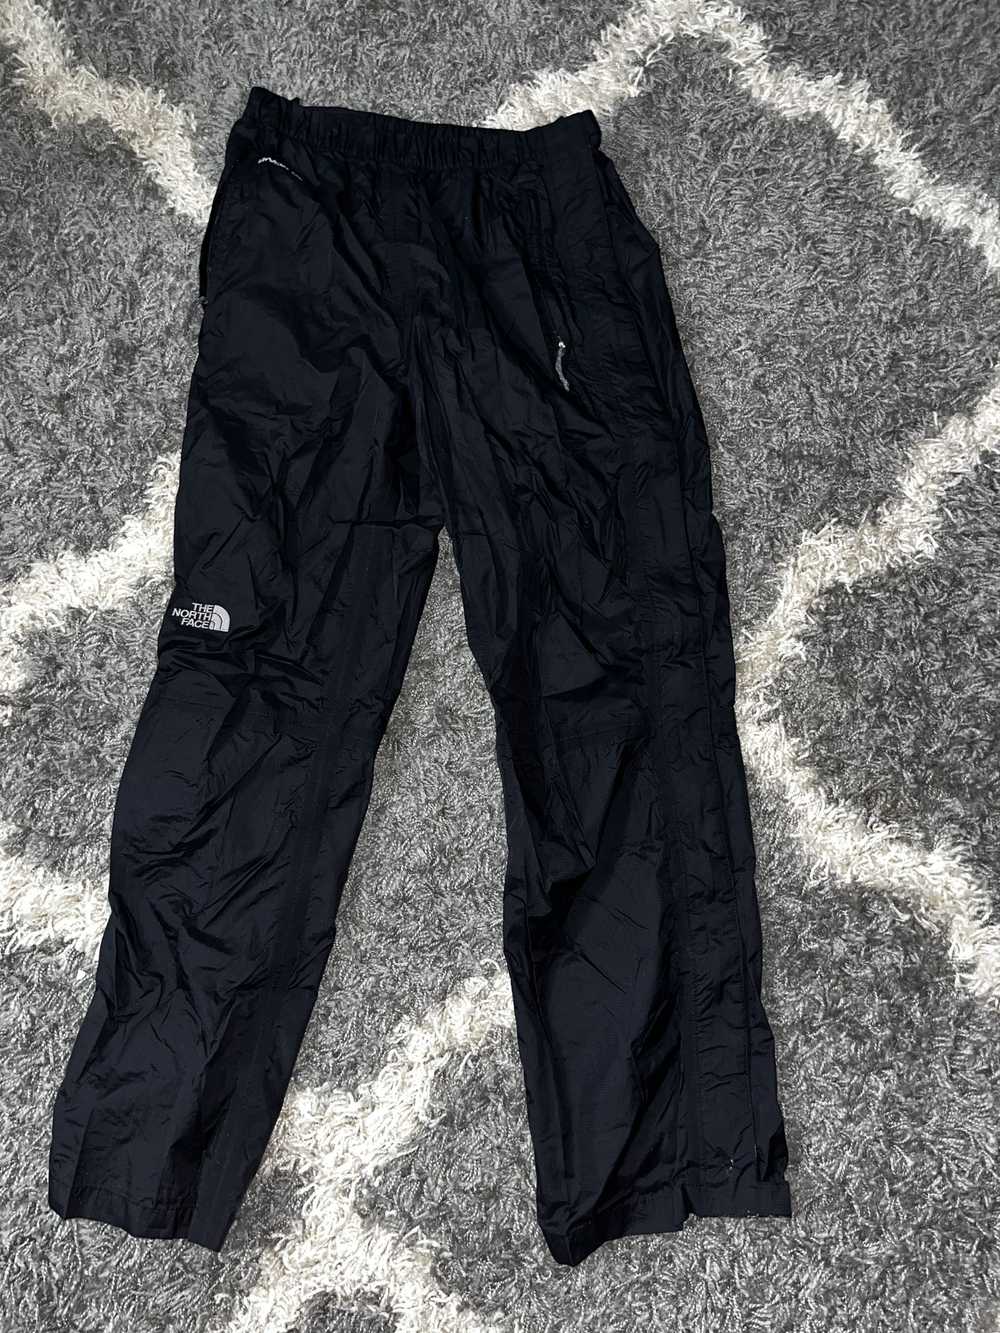 The North Face North face pants - image 1